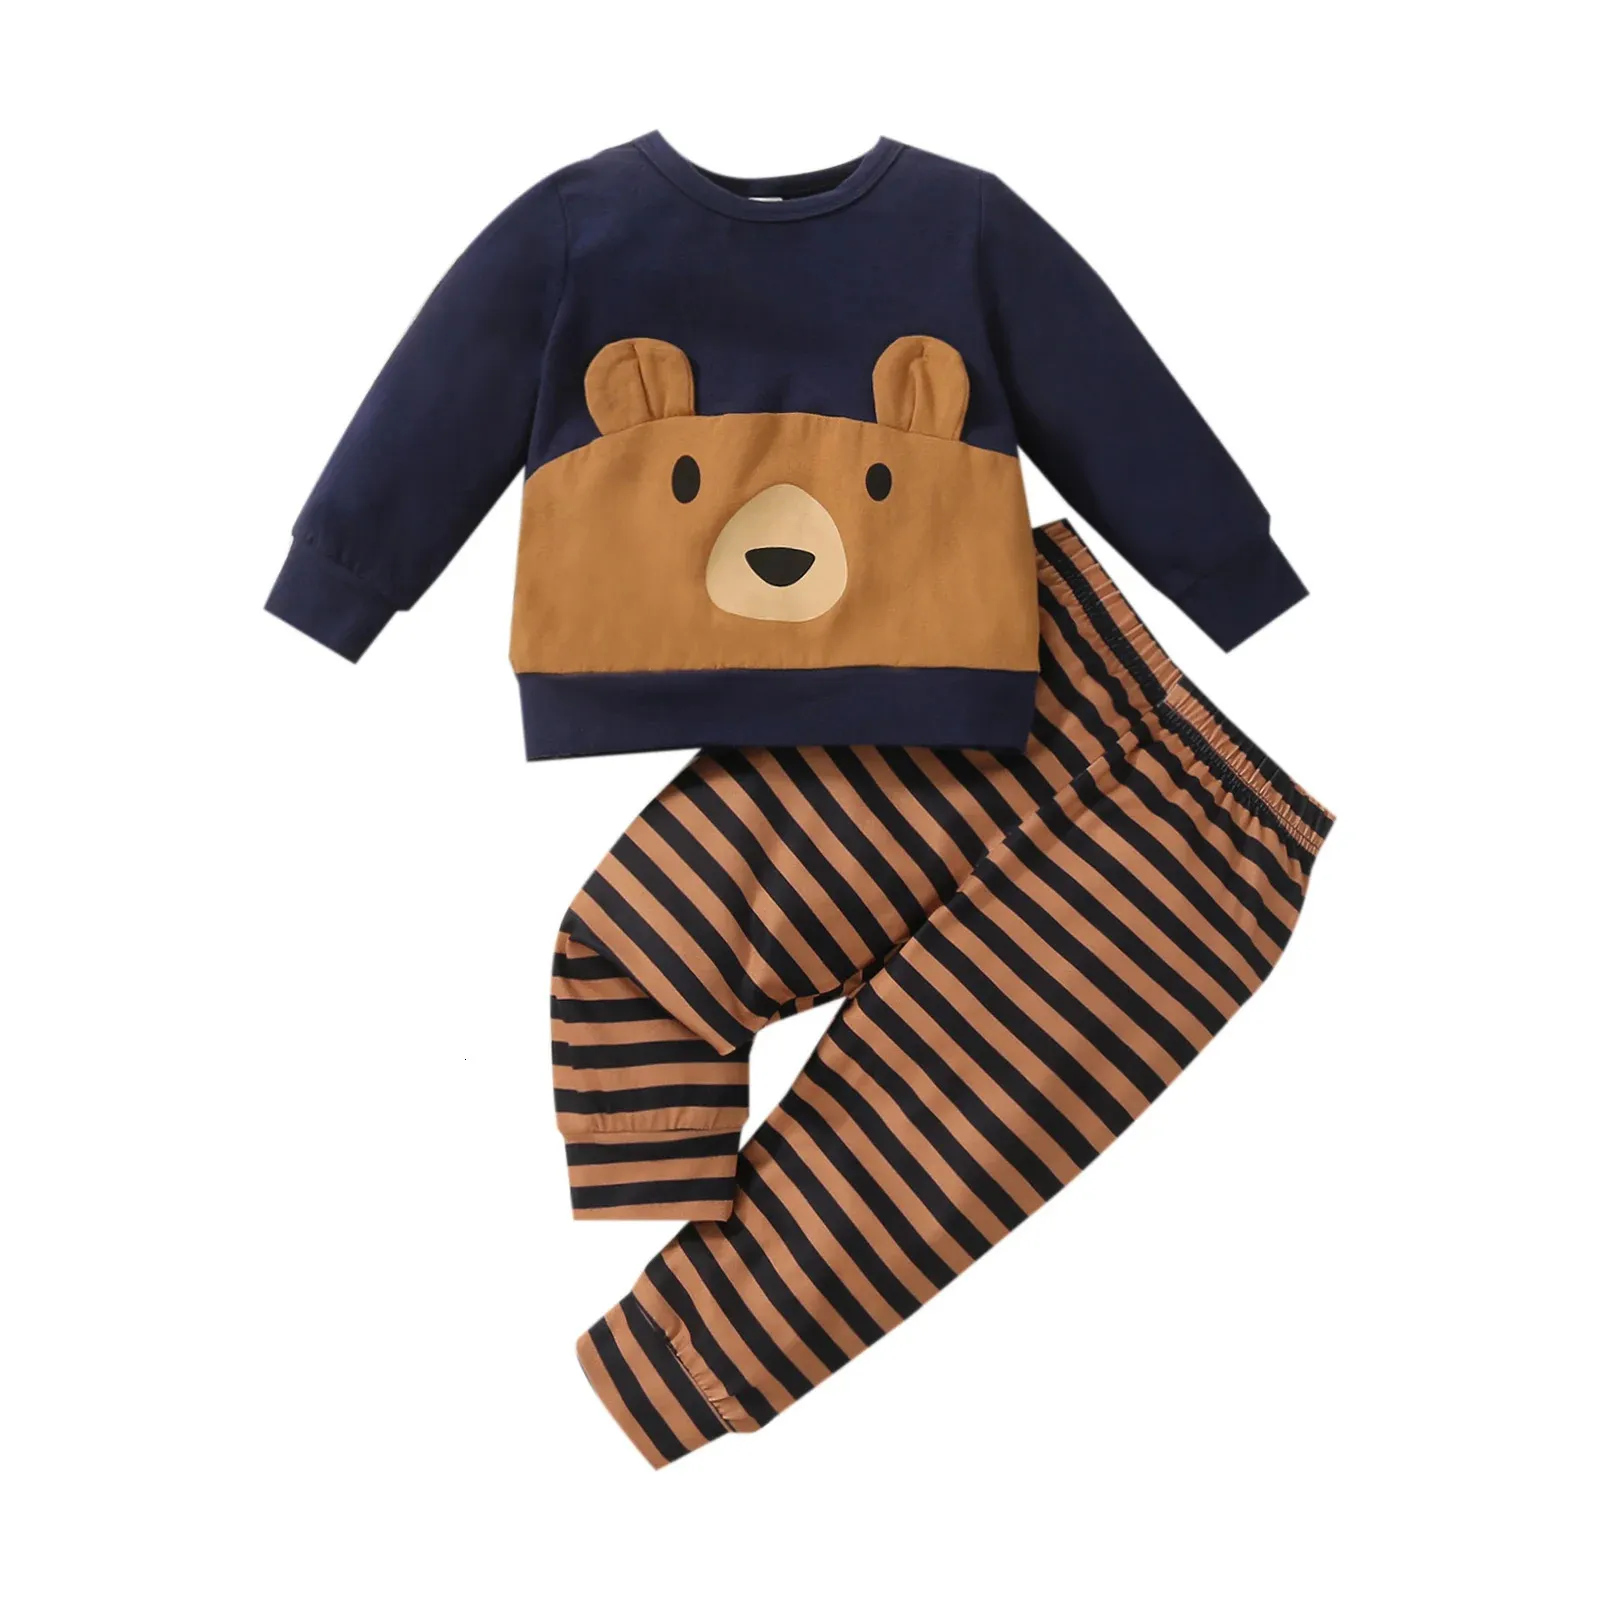 Clothing Sets Little Boy's T-shirt and Trousers Suit Cartoon Bear Printed Long Sleeve Tops and Stripe Long Pants 6M-3T 231025